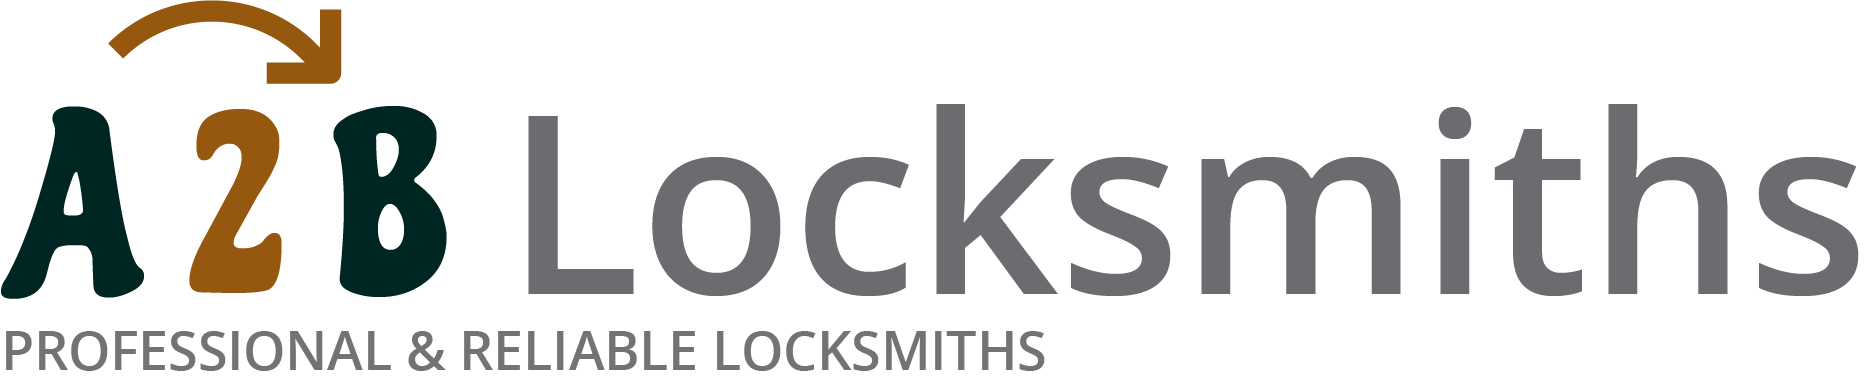 If you are locked out of house in Shildon, our 24/7 local emergency locksmith services can help you.